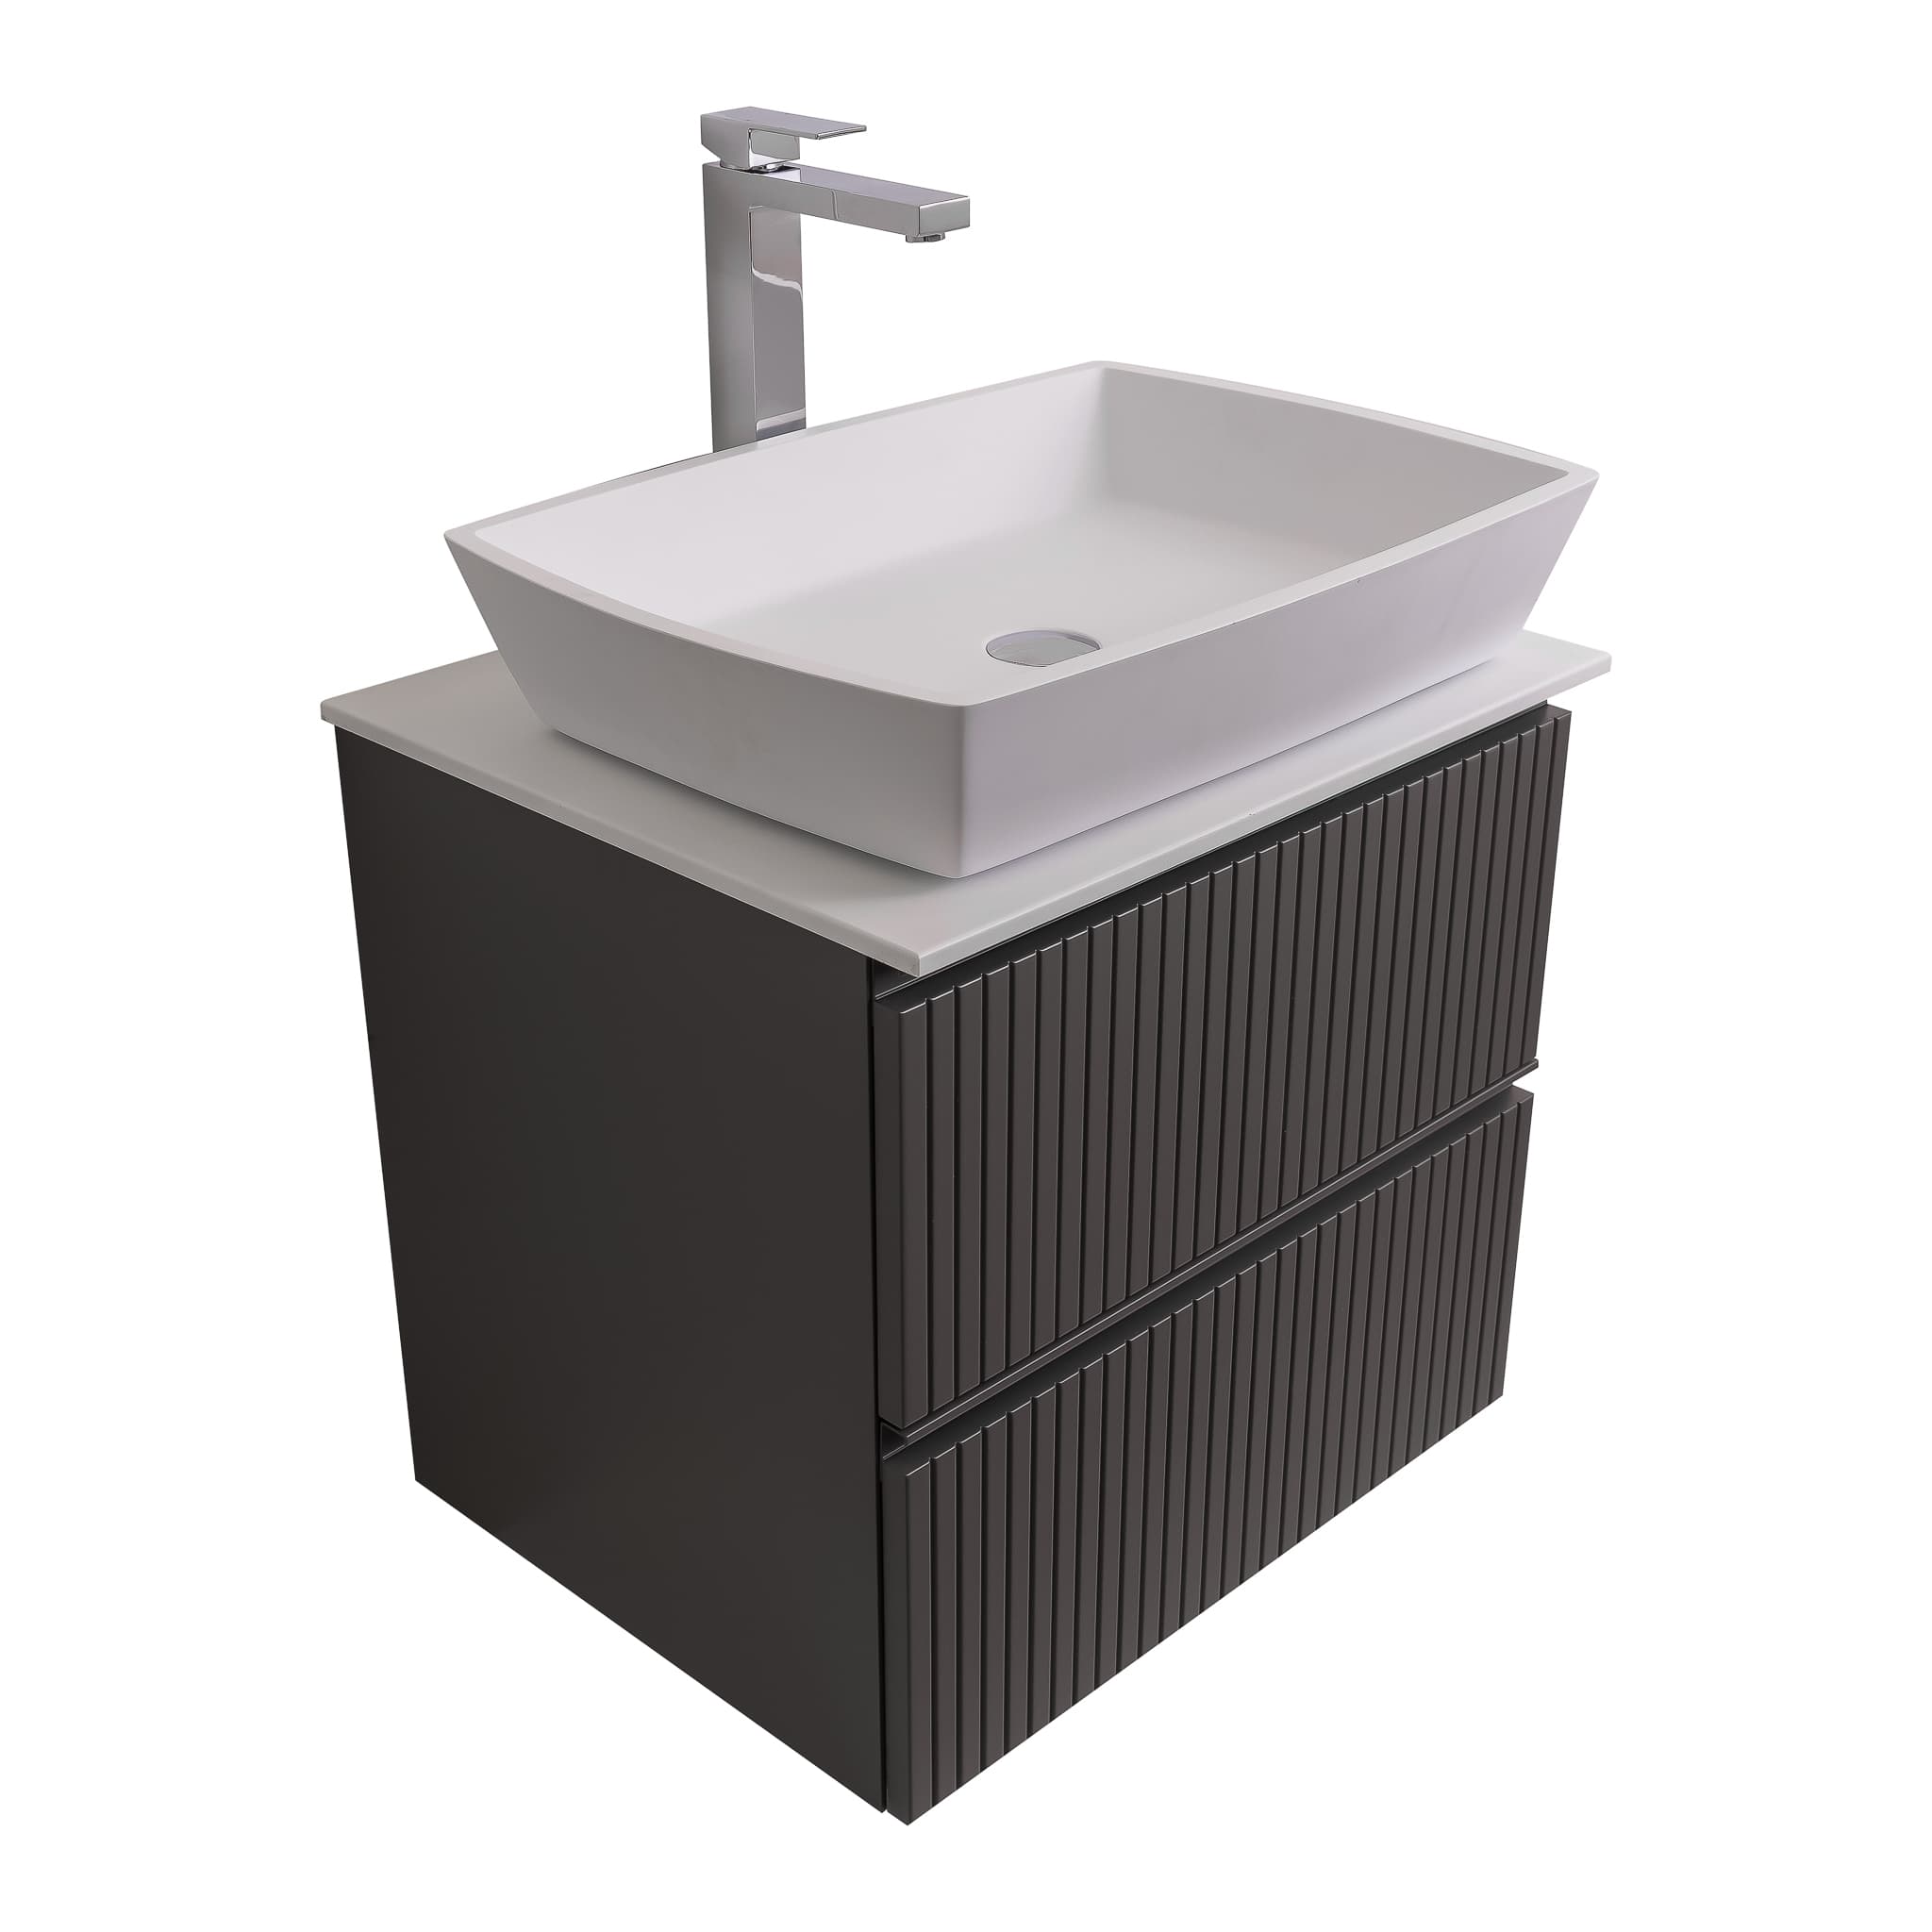 Ares 23.5 Matte Grey Cabinet, Solid Surface Flat White Counter And Square Solid Surface White Basin 1316, Wall Mounted Modern Vanity Set